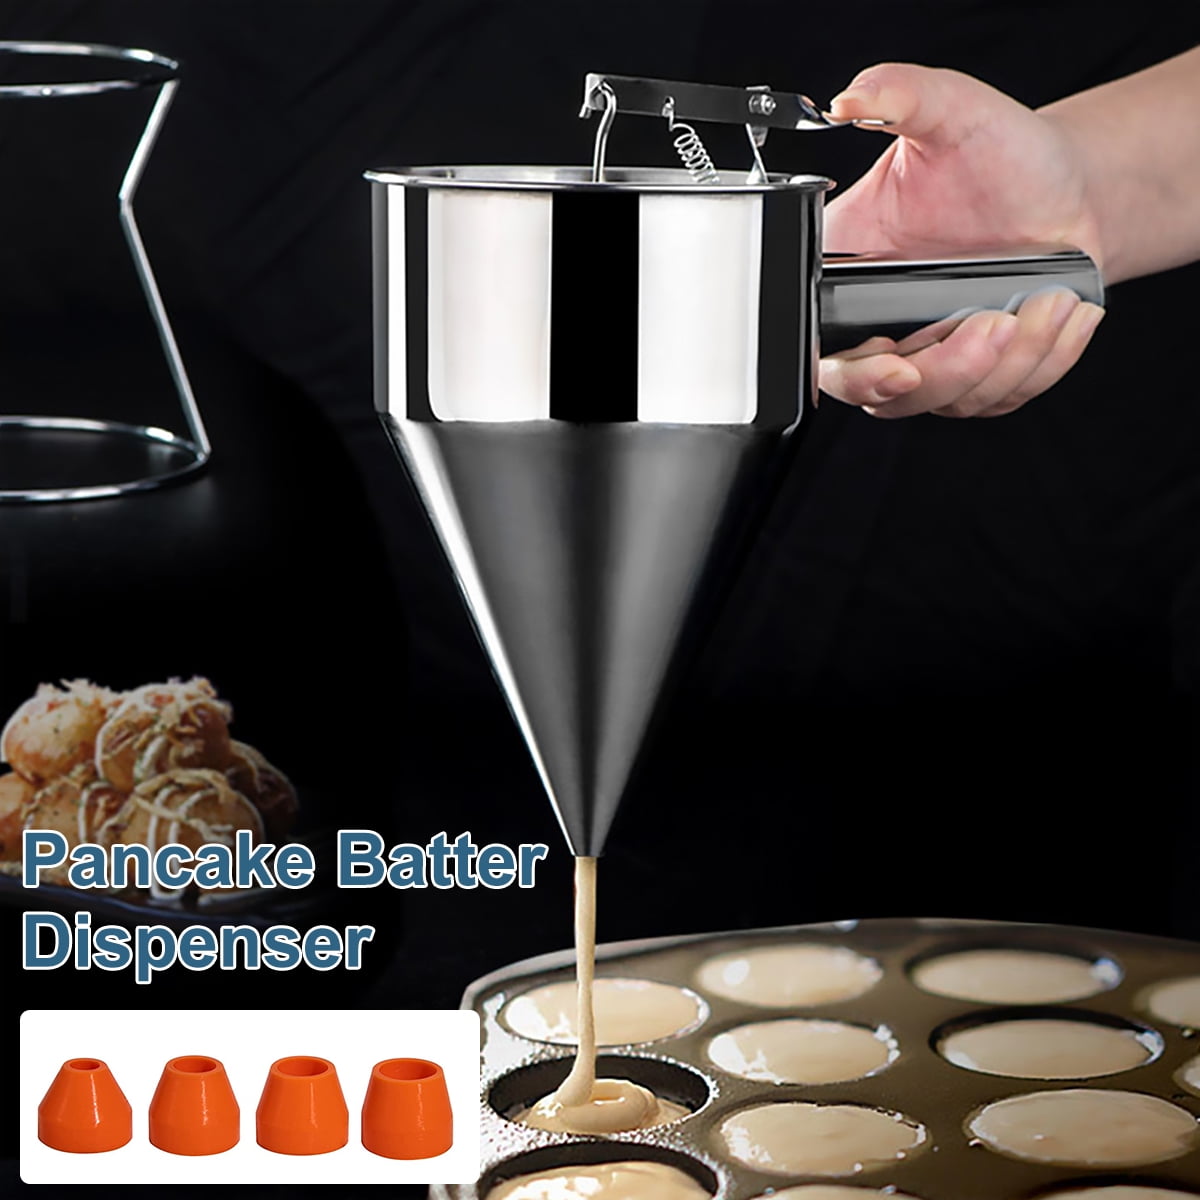  40oz Pancake Batter Dispenser, Stainless Steel Funnel Cake  Dispenser with Stand Heavy Duty Baking Tool for Cupcake Waffles Cakes,  Caliber: 0.31/0.47/0.55/0.67 : Home & Kitchen